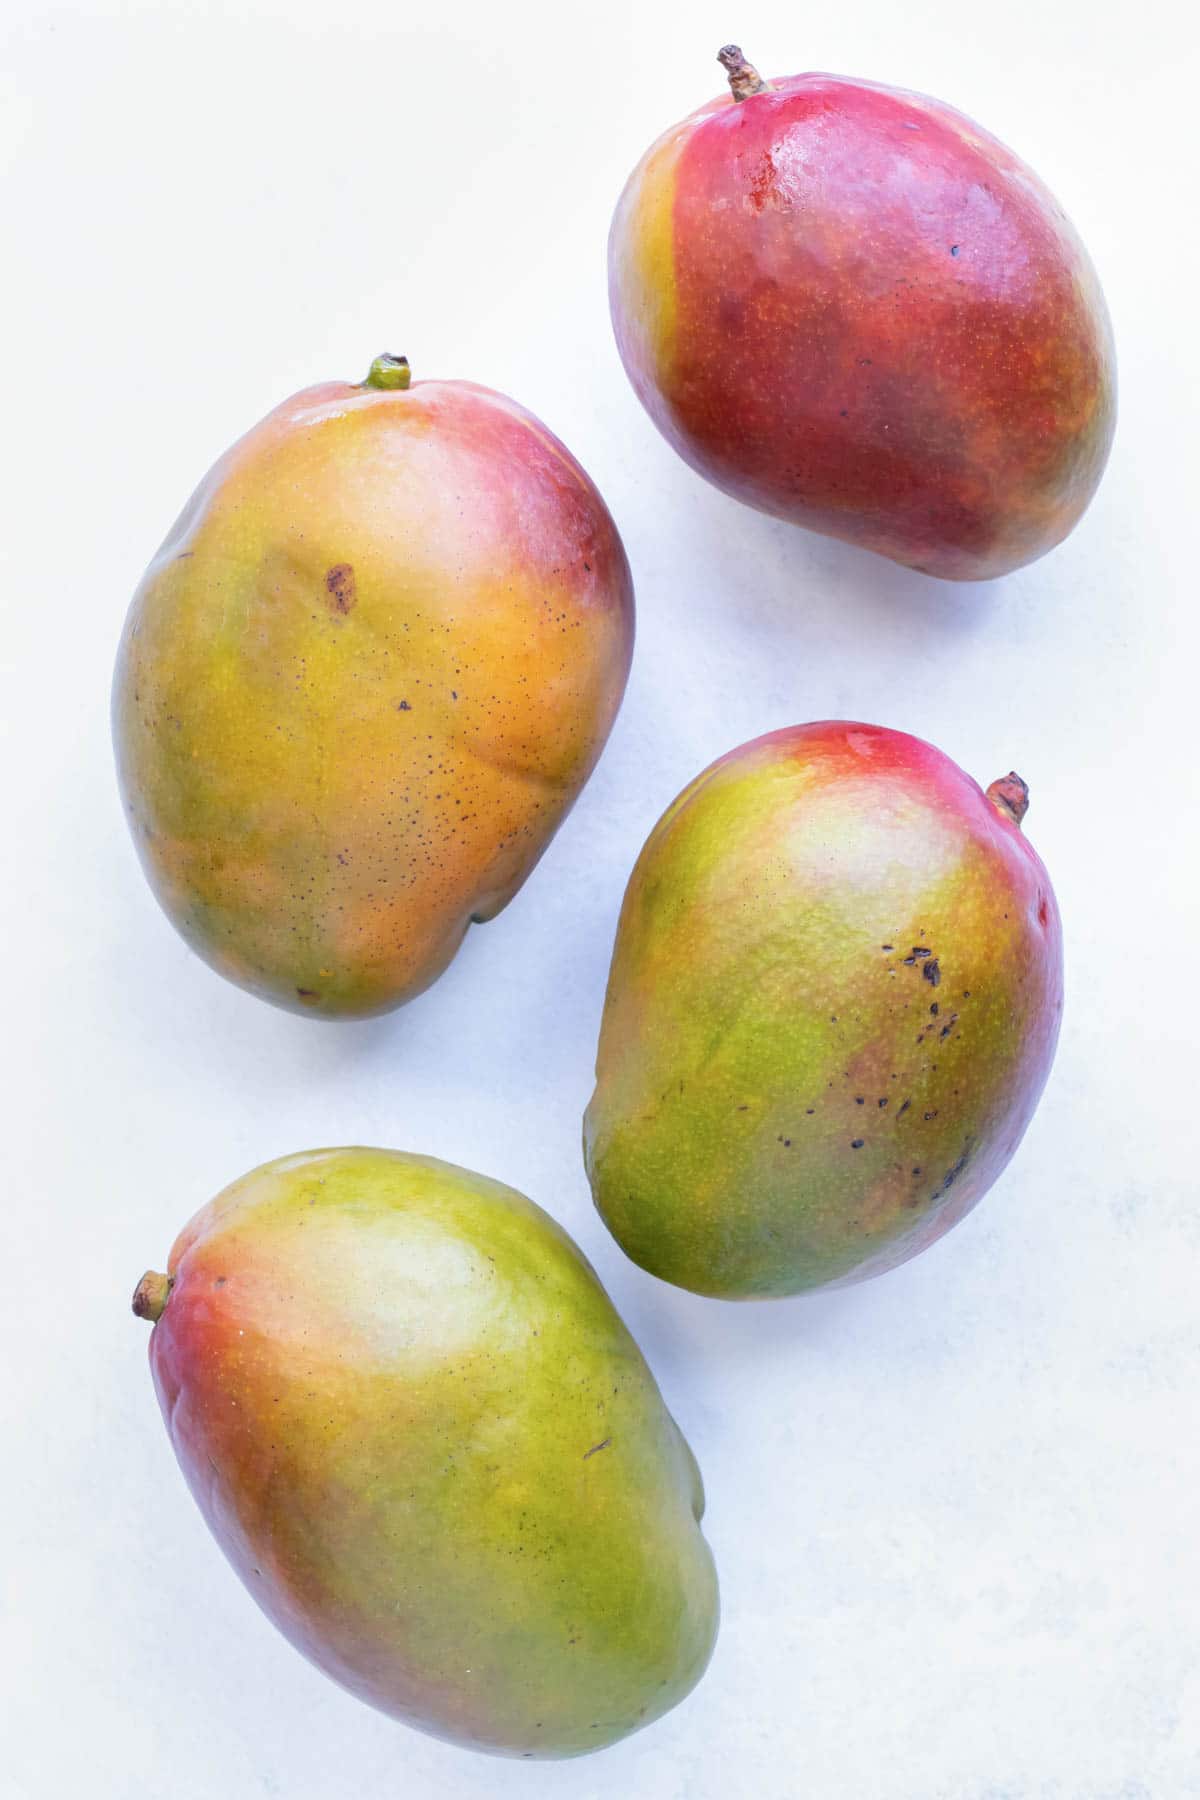 Four ripened mangos with their stems.